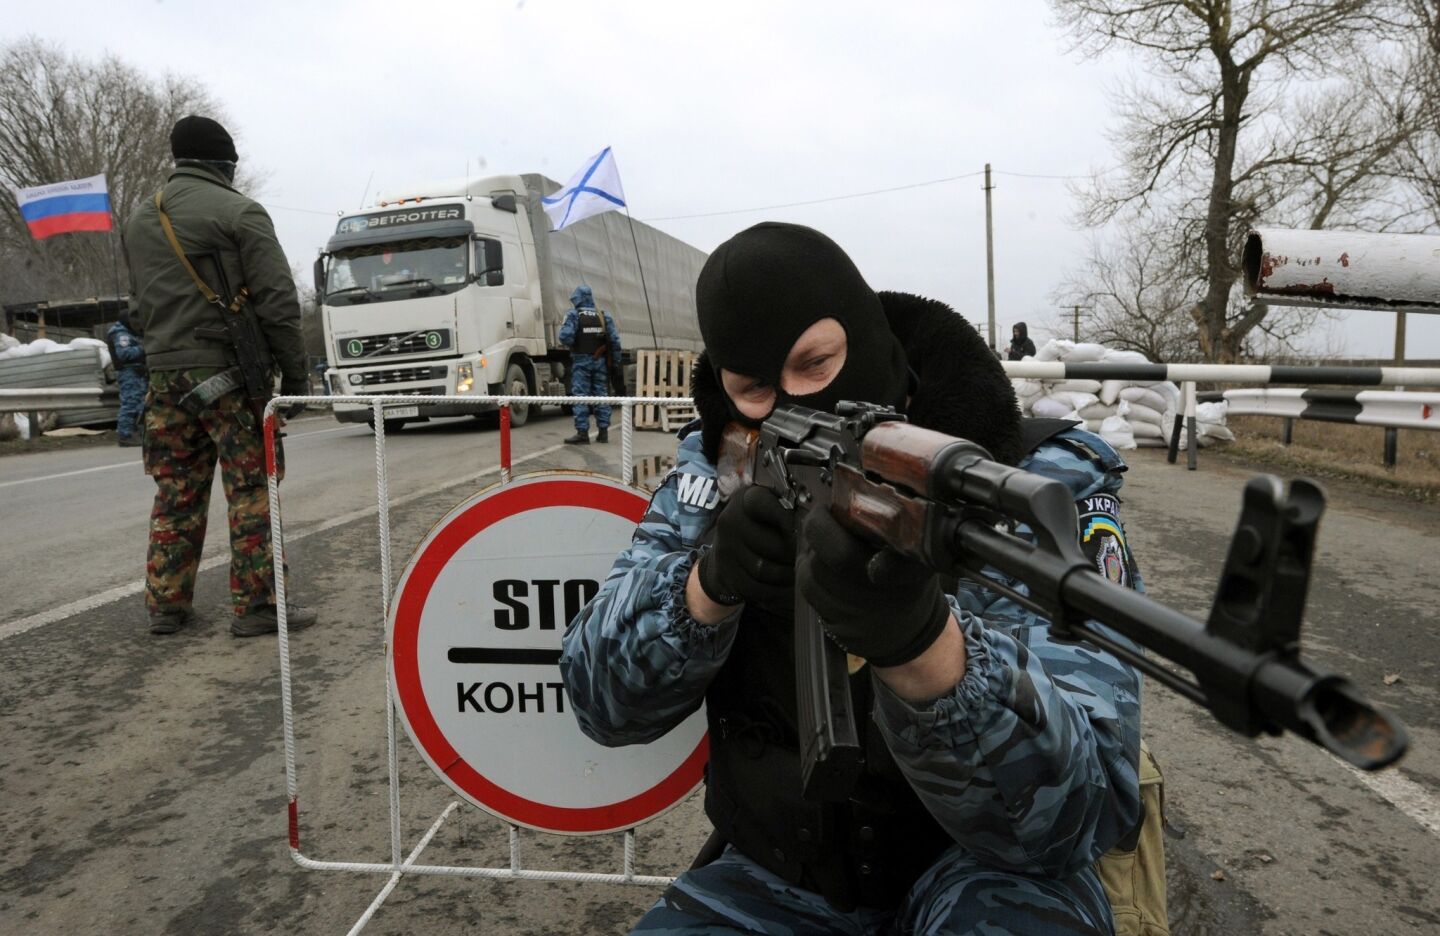 One of the armed masked men who call themselves members of Ukraine's disbanded elite Berkut riot police force aims his Klashnikov rifle at a checkpoint under Russian flags on a highway that connects the Black Sea Crimea peninsula to mainland Ukraine.